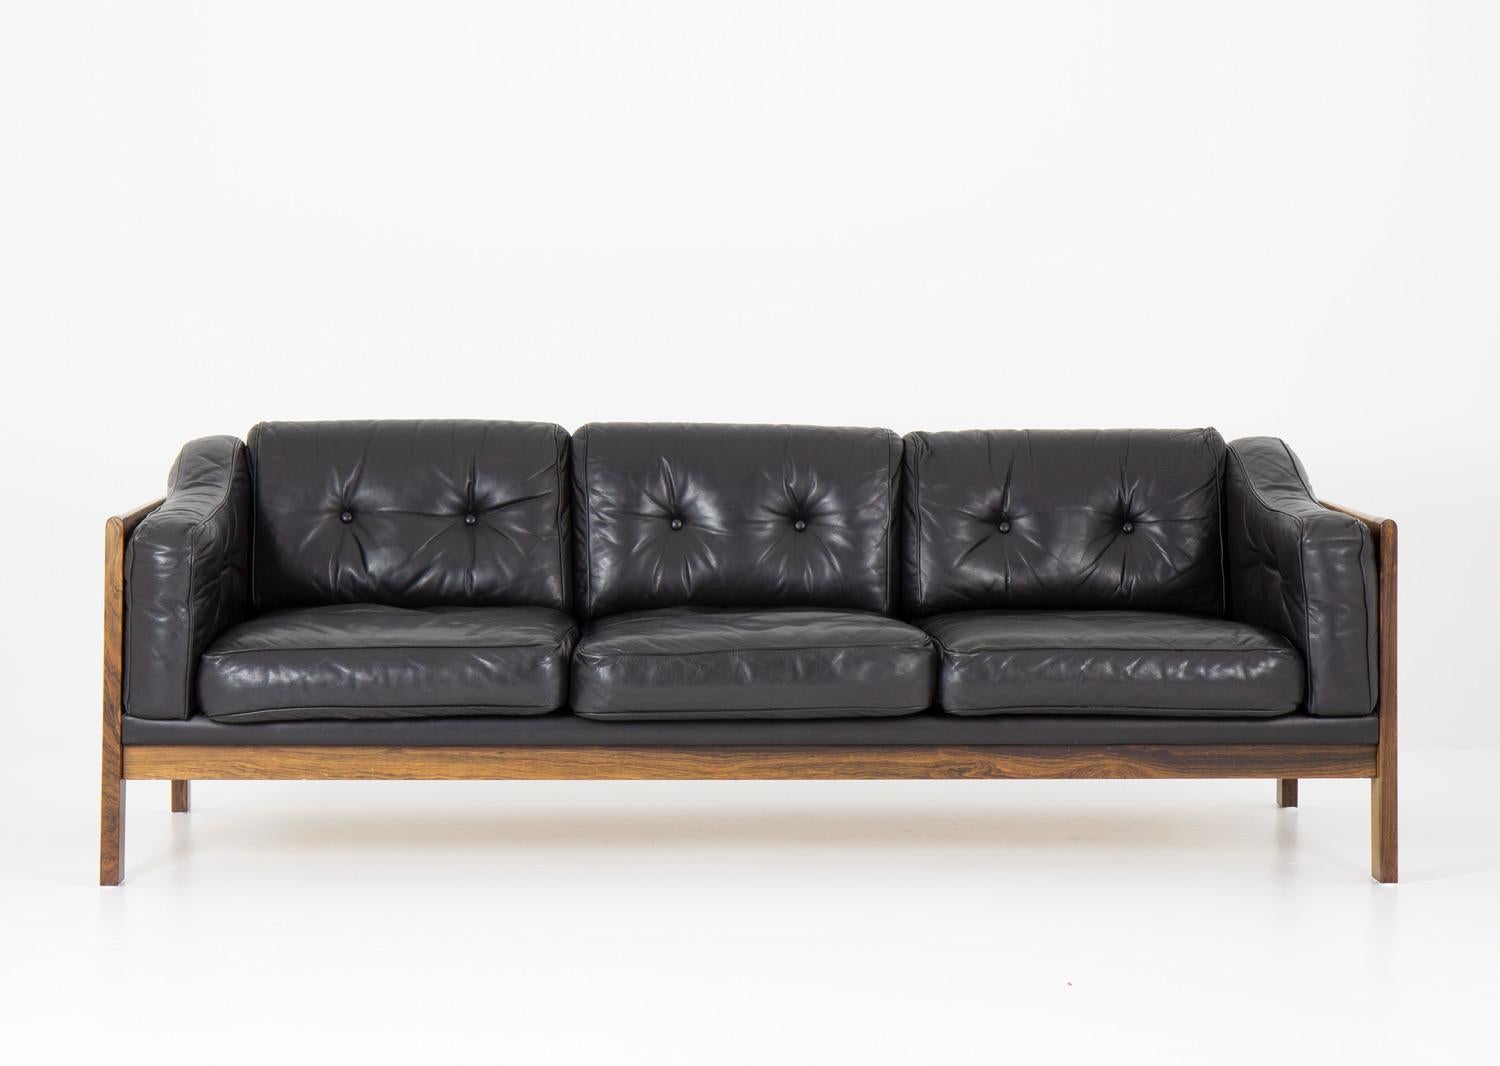 Top-quality lounge sofa designed by Ingvar Stockum for Futura Möbler in 1965. 

Its beautiful frame and low profile adds to the elegance of this sofa.

The 